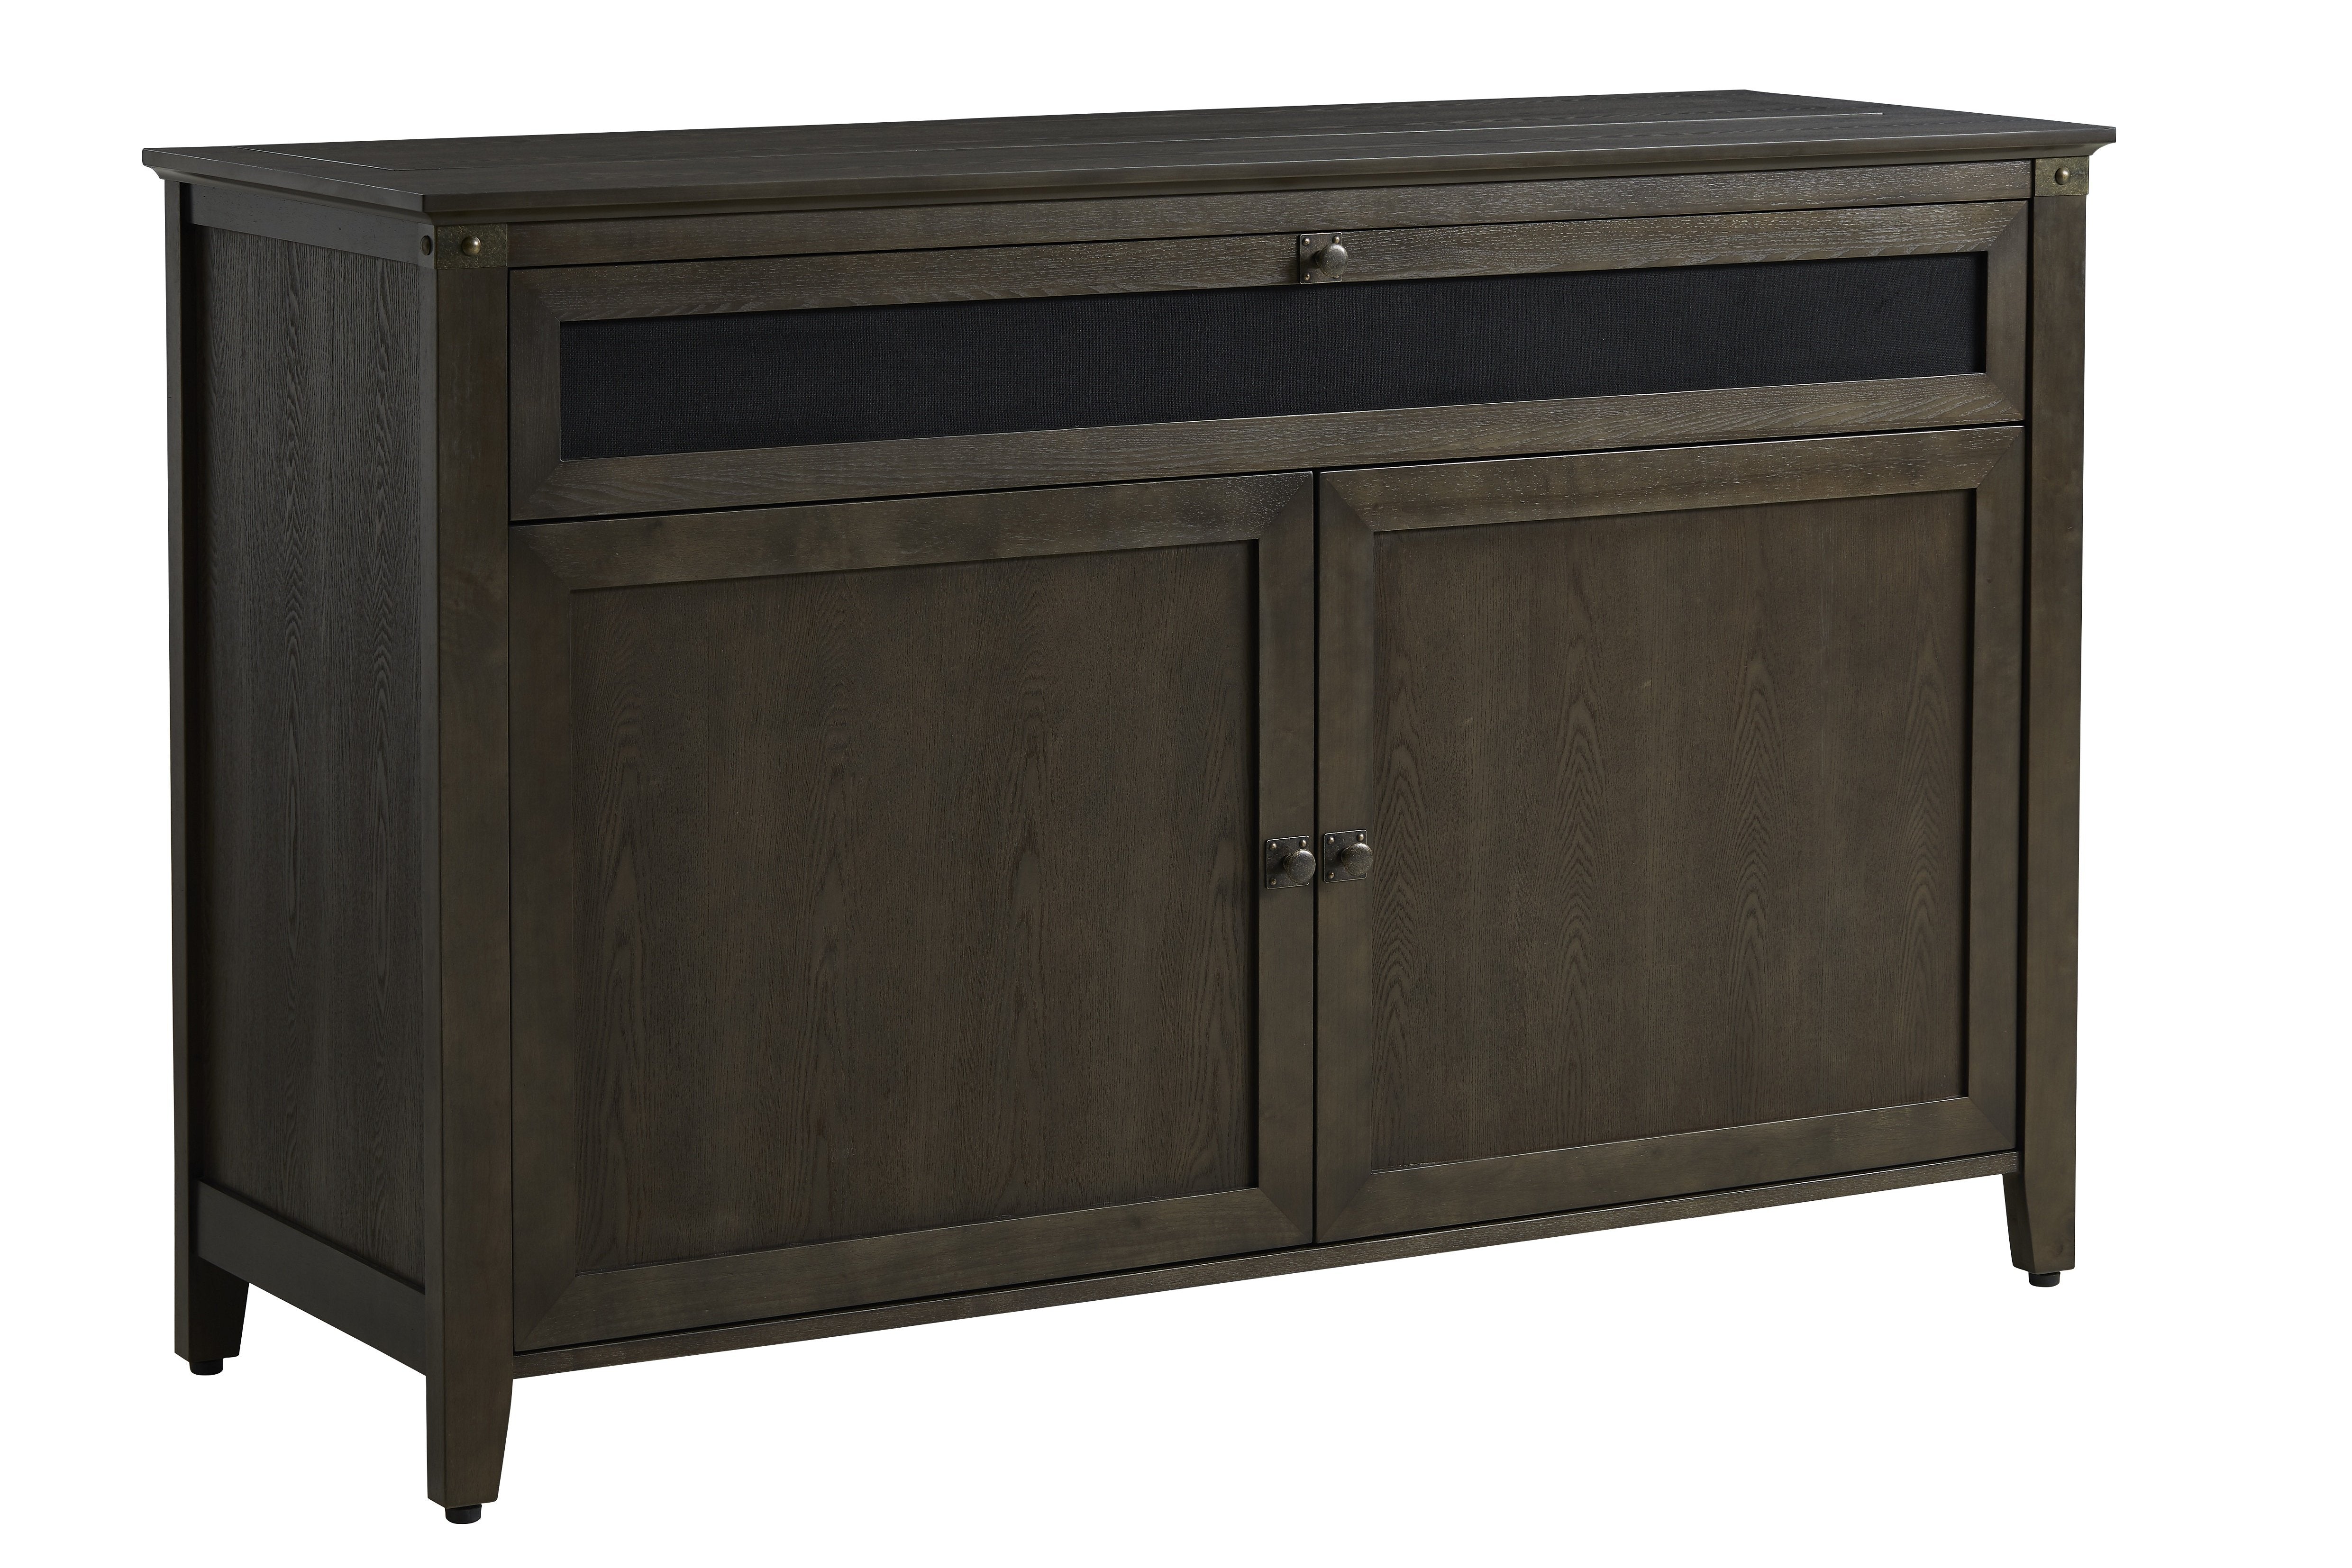 	The Claymont 70063 TV Lift Cabinet for 65 inch Flat screen TVs angled.